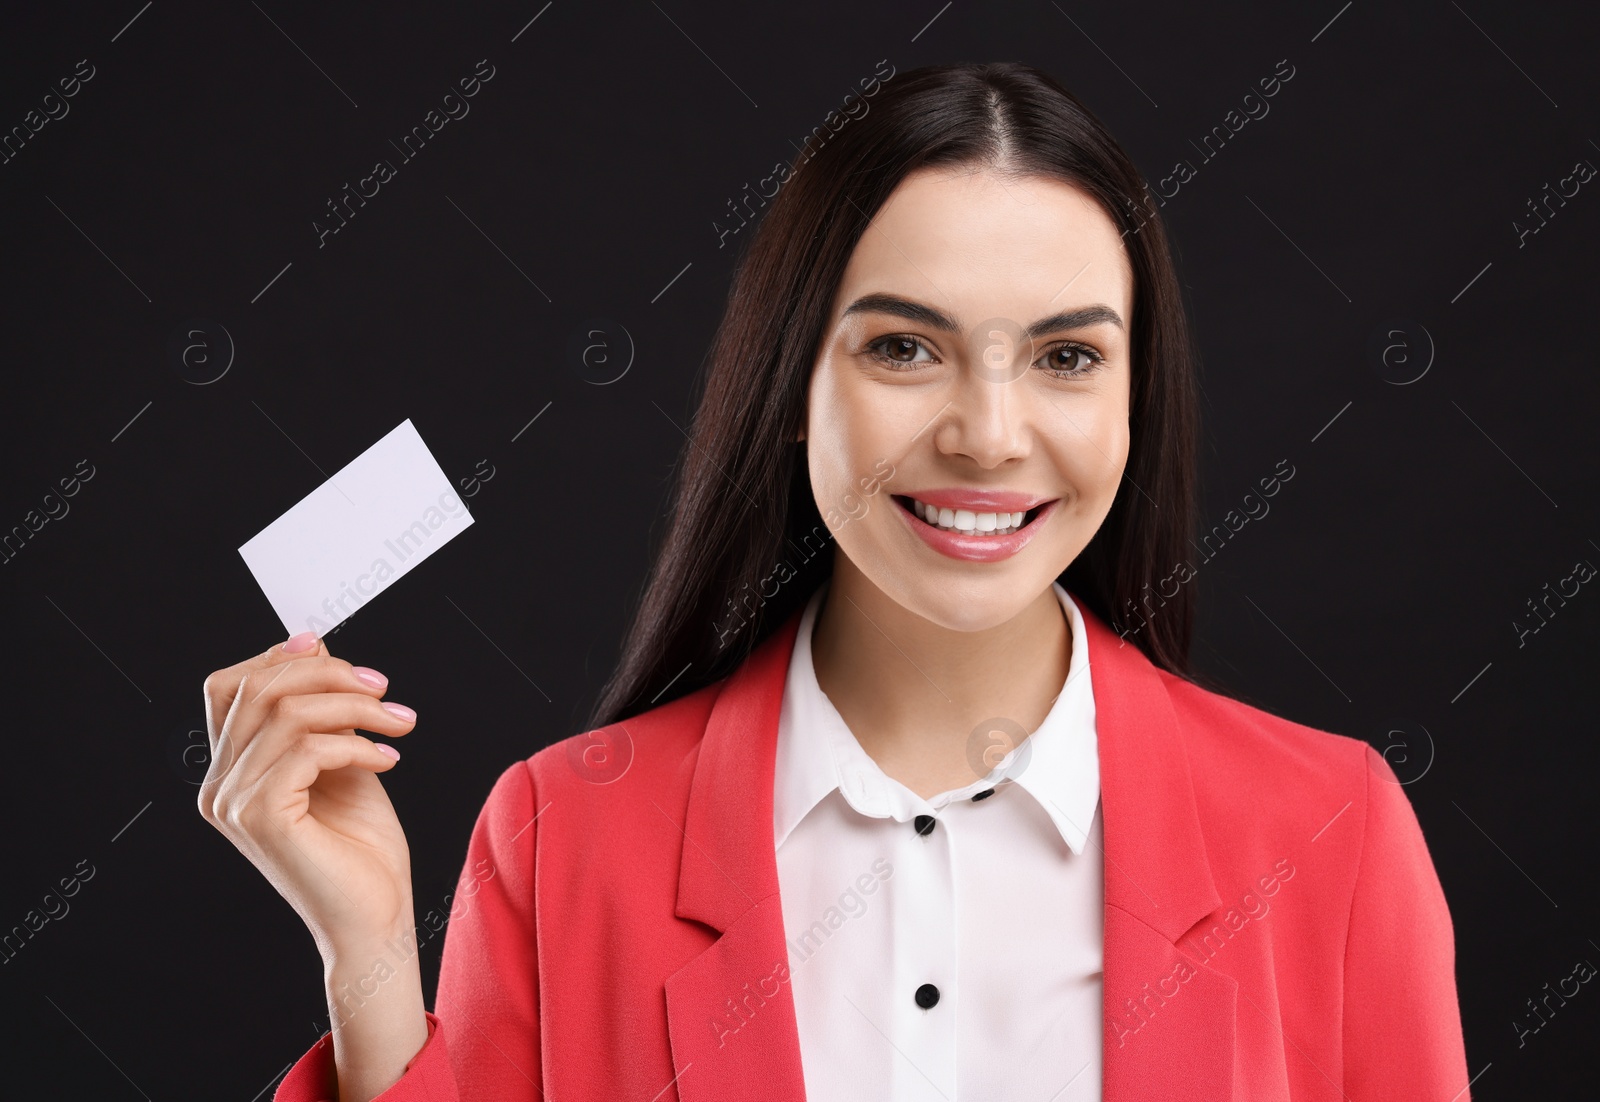 Photo of Happy woman holding blank business card on black background